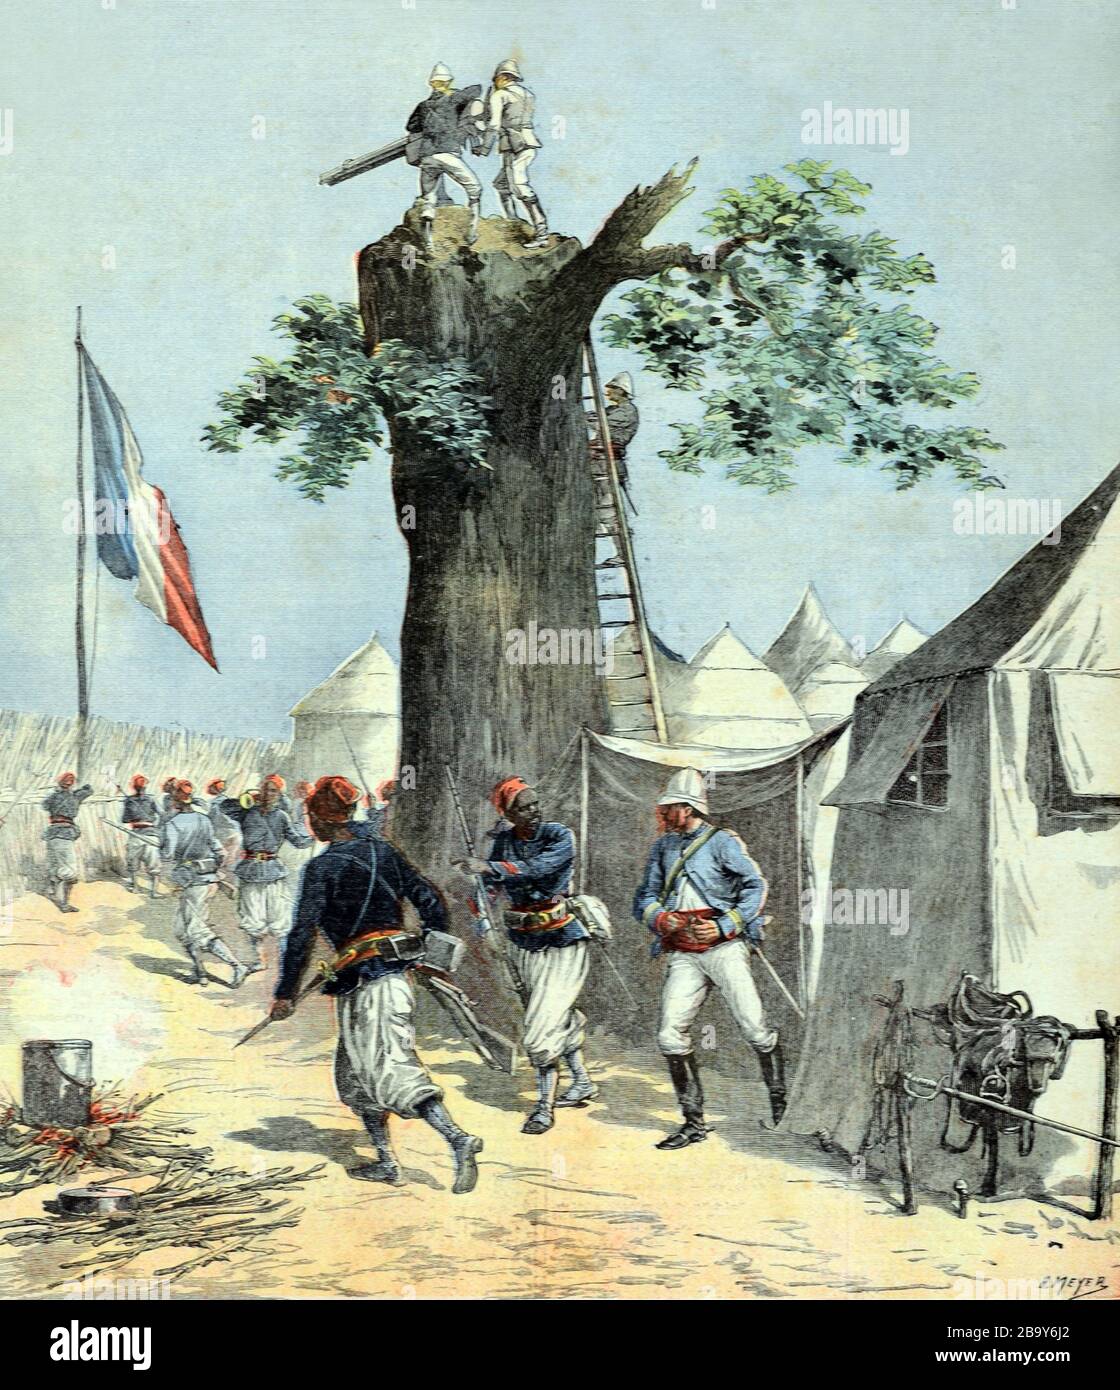 French Soldiers Set Up Machine Gun Post on Top of Baobab Tree in Defense of French Sudan (now Mali) Haut-Niger West Africa 1891. Vintage or Old Illustration Stock Photo